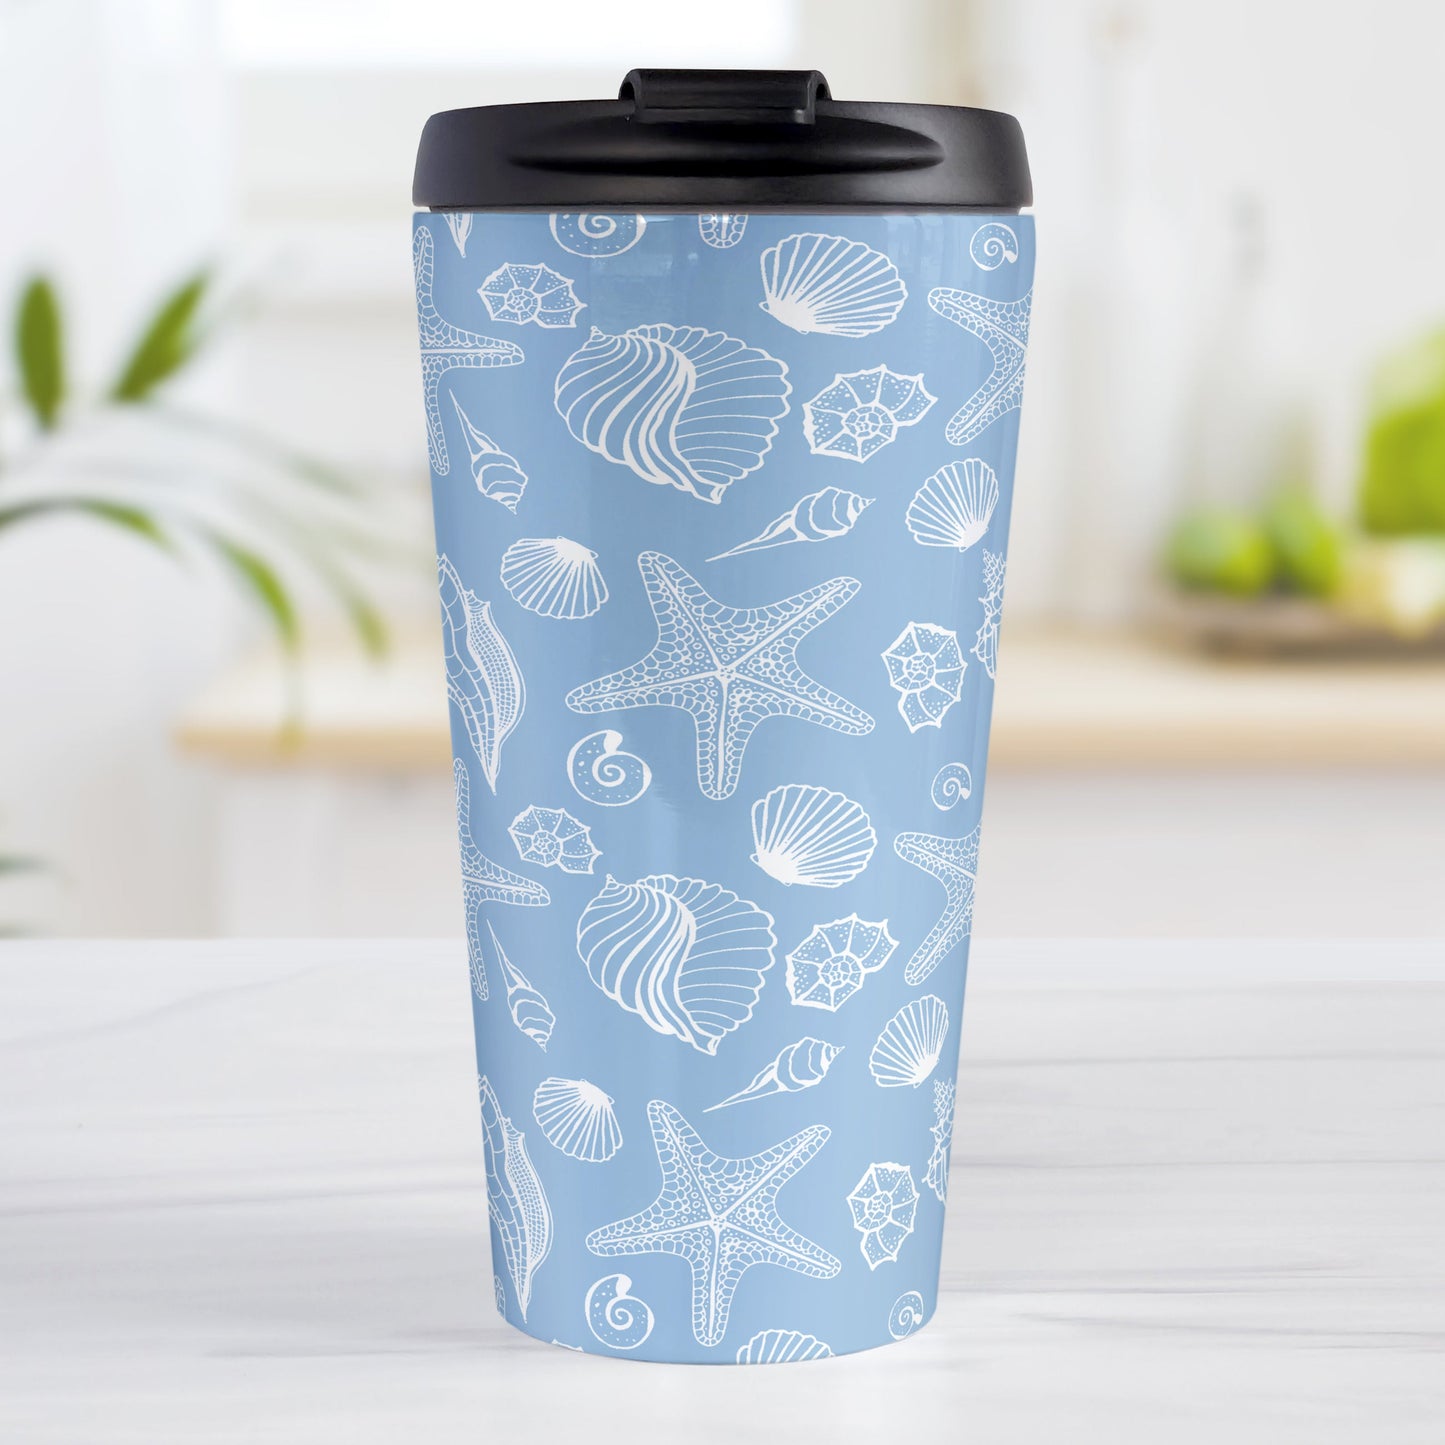 White Seashell Pattern Blue Beach Travel Mug (15oz, stainless steel insulated) at Amy's Coffee Mugs. A travel mug designed with a white seashell line drawing pattern over a blue background that wraps around the travel mug.